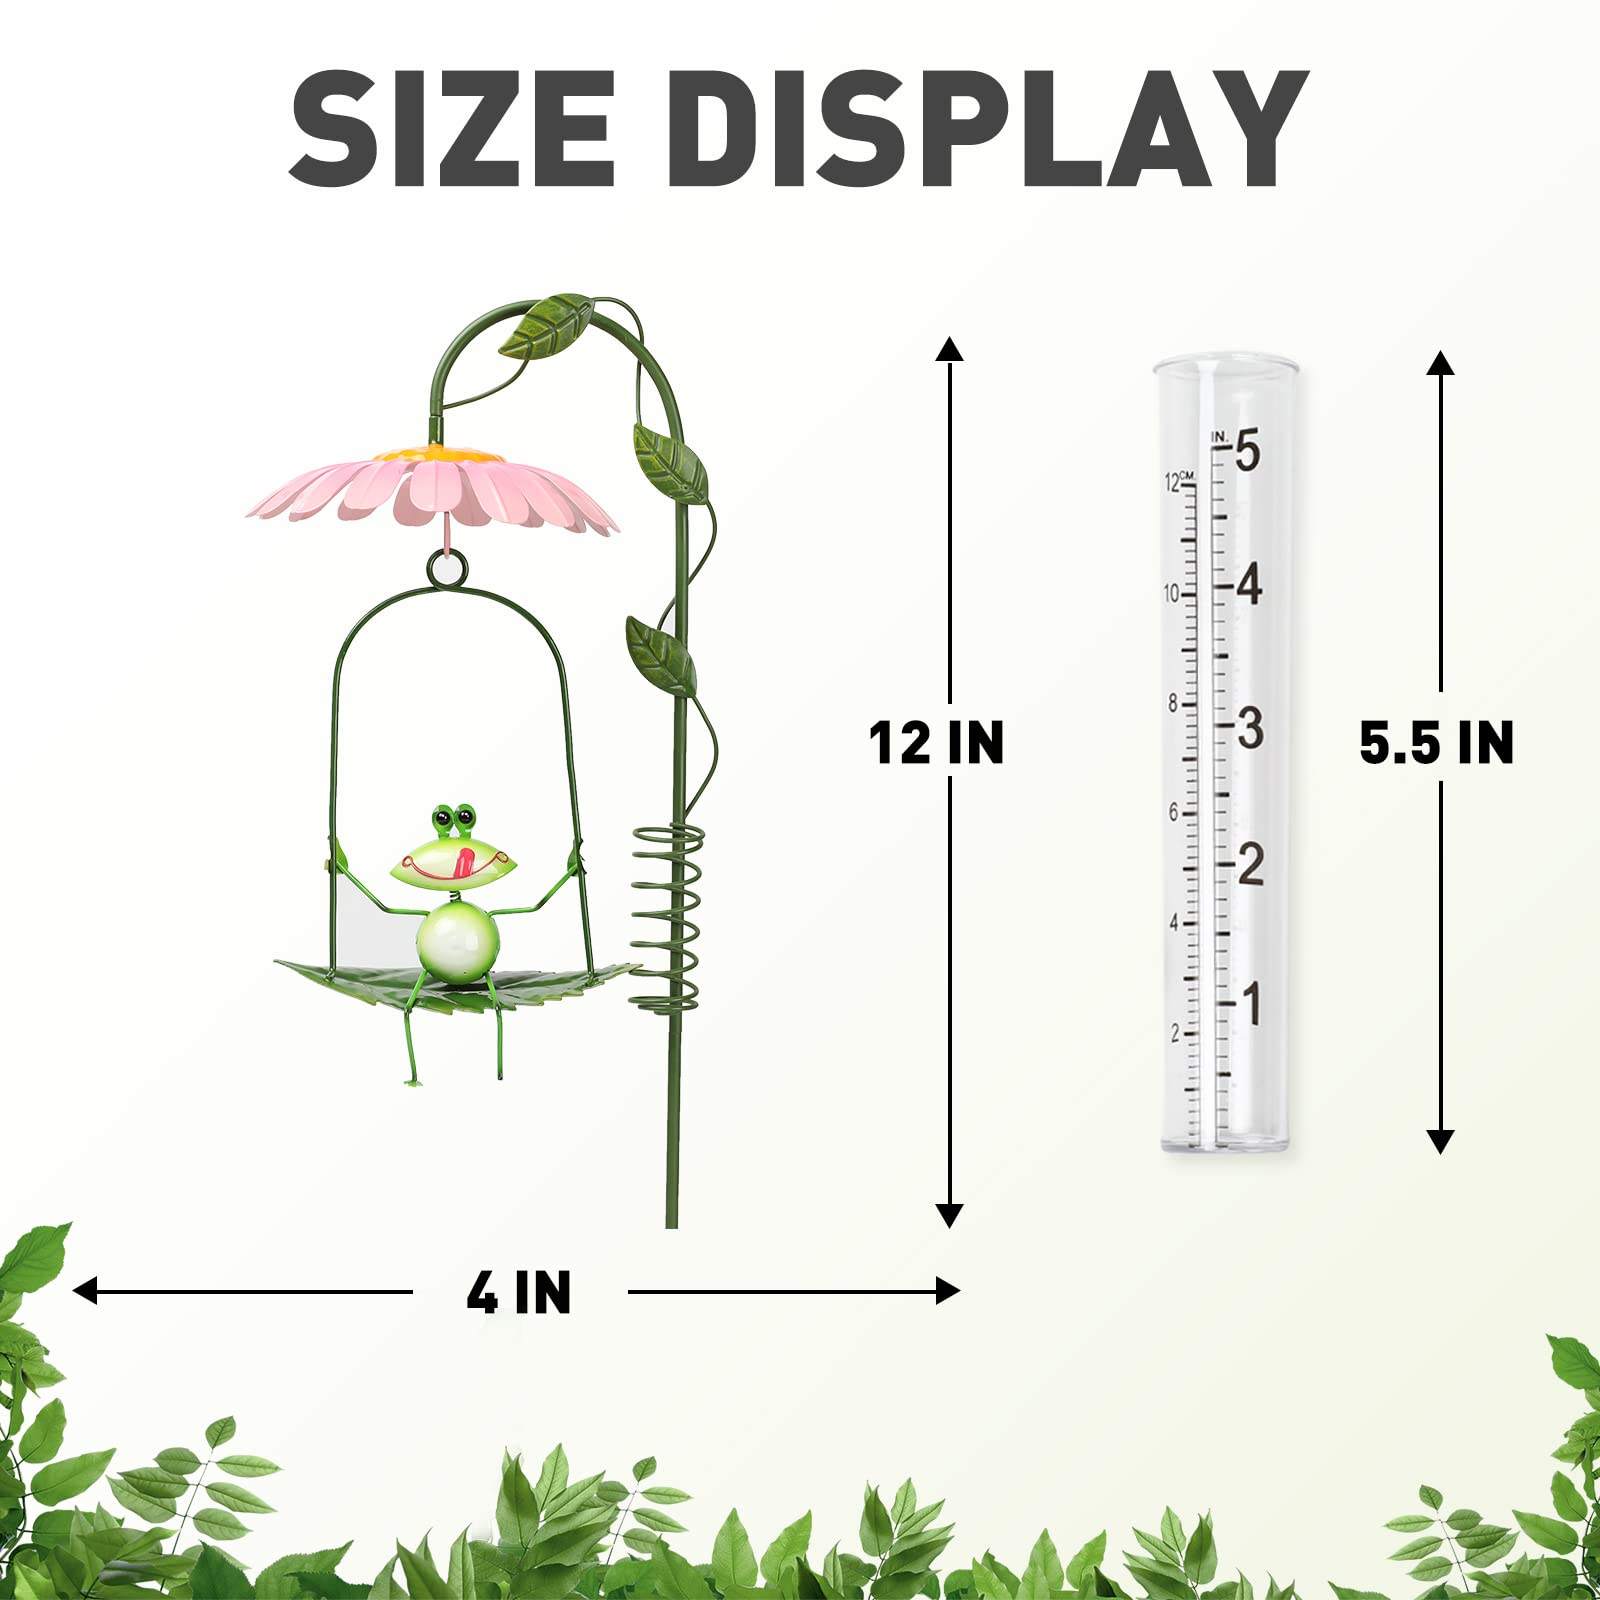 Outdoor Metal Swing The Frog Figurine Rain Gauge Stake With Plastic Tube For Yard Garden Stakes Decor